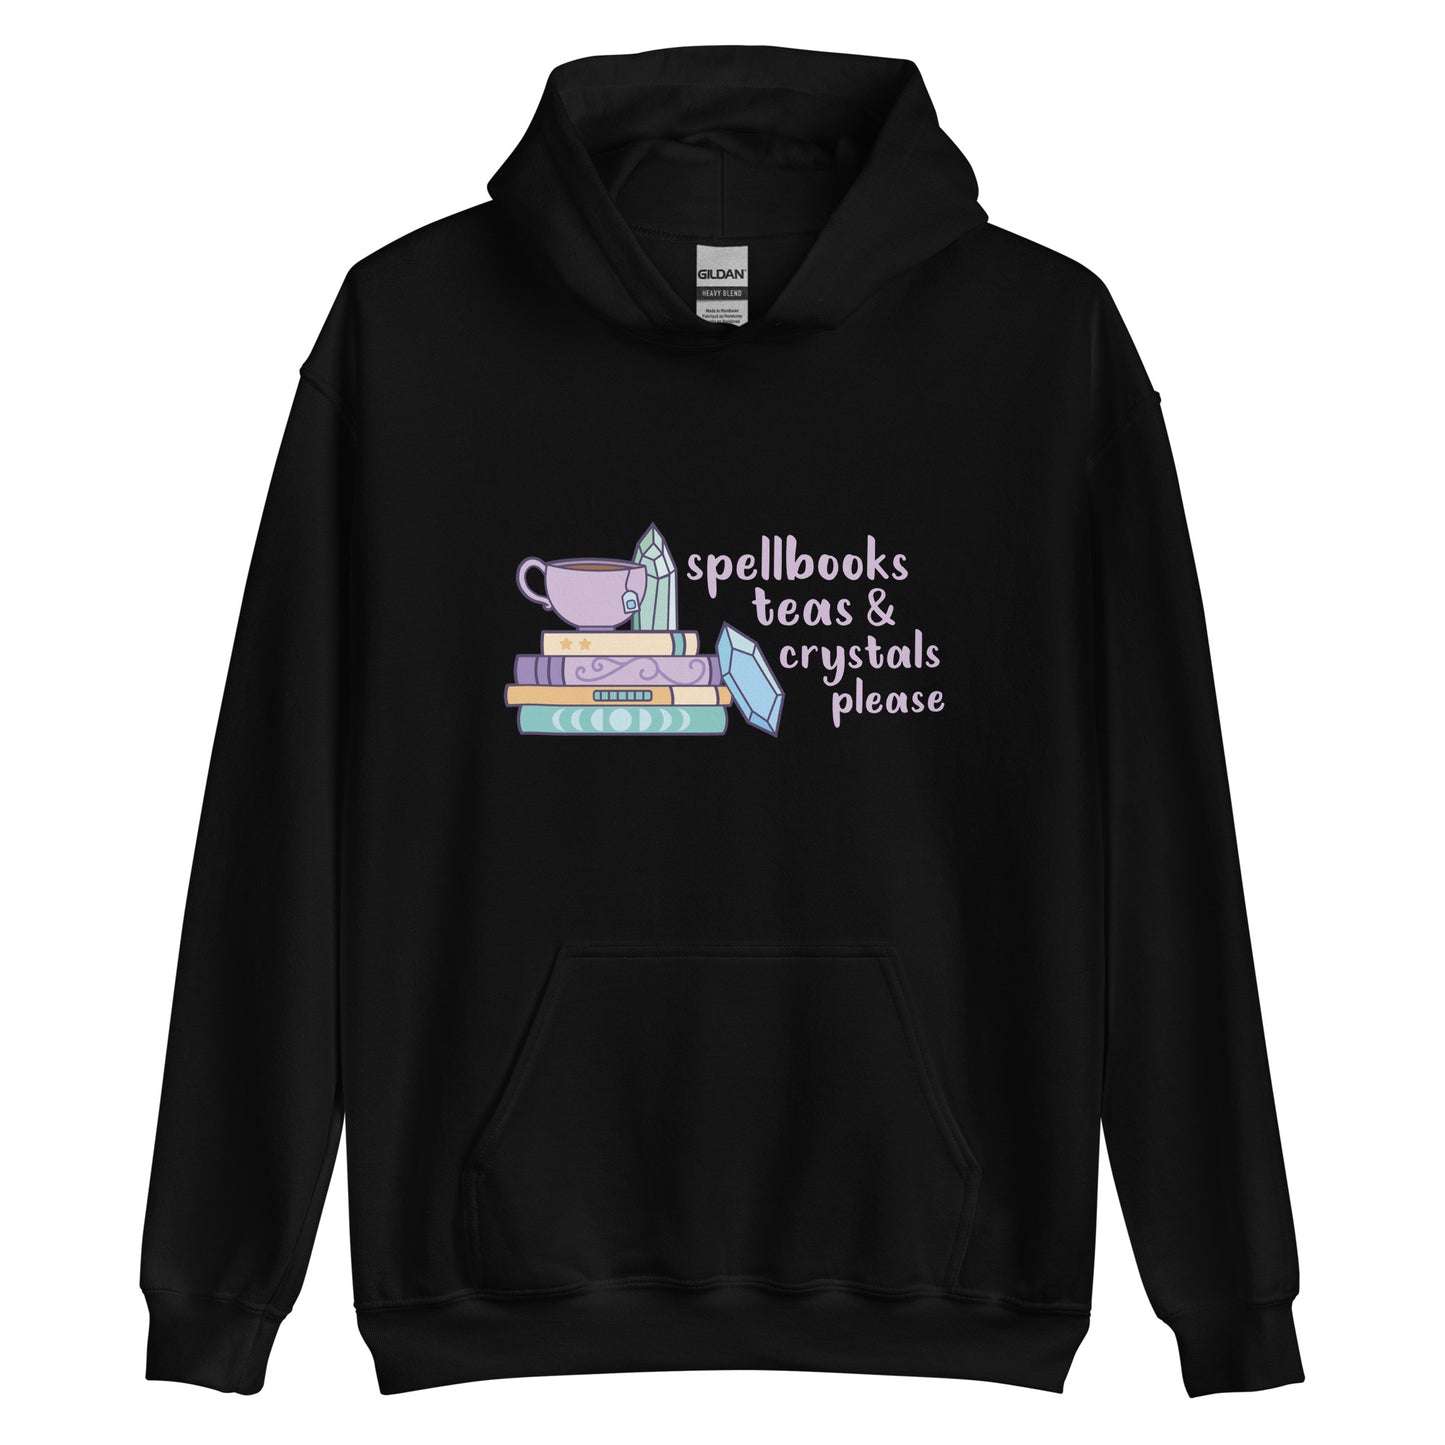 A black hooded sweatshirt featuring an illustration of a stack of spellbooks with a teacup and a crystal resting on top. Another crystal rests on the side of the stack, and text next to the illustration reads "Spellbooks, teas & crystals please"